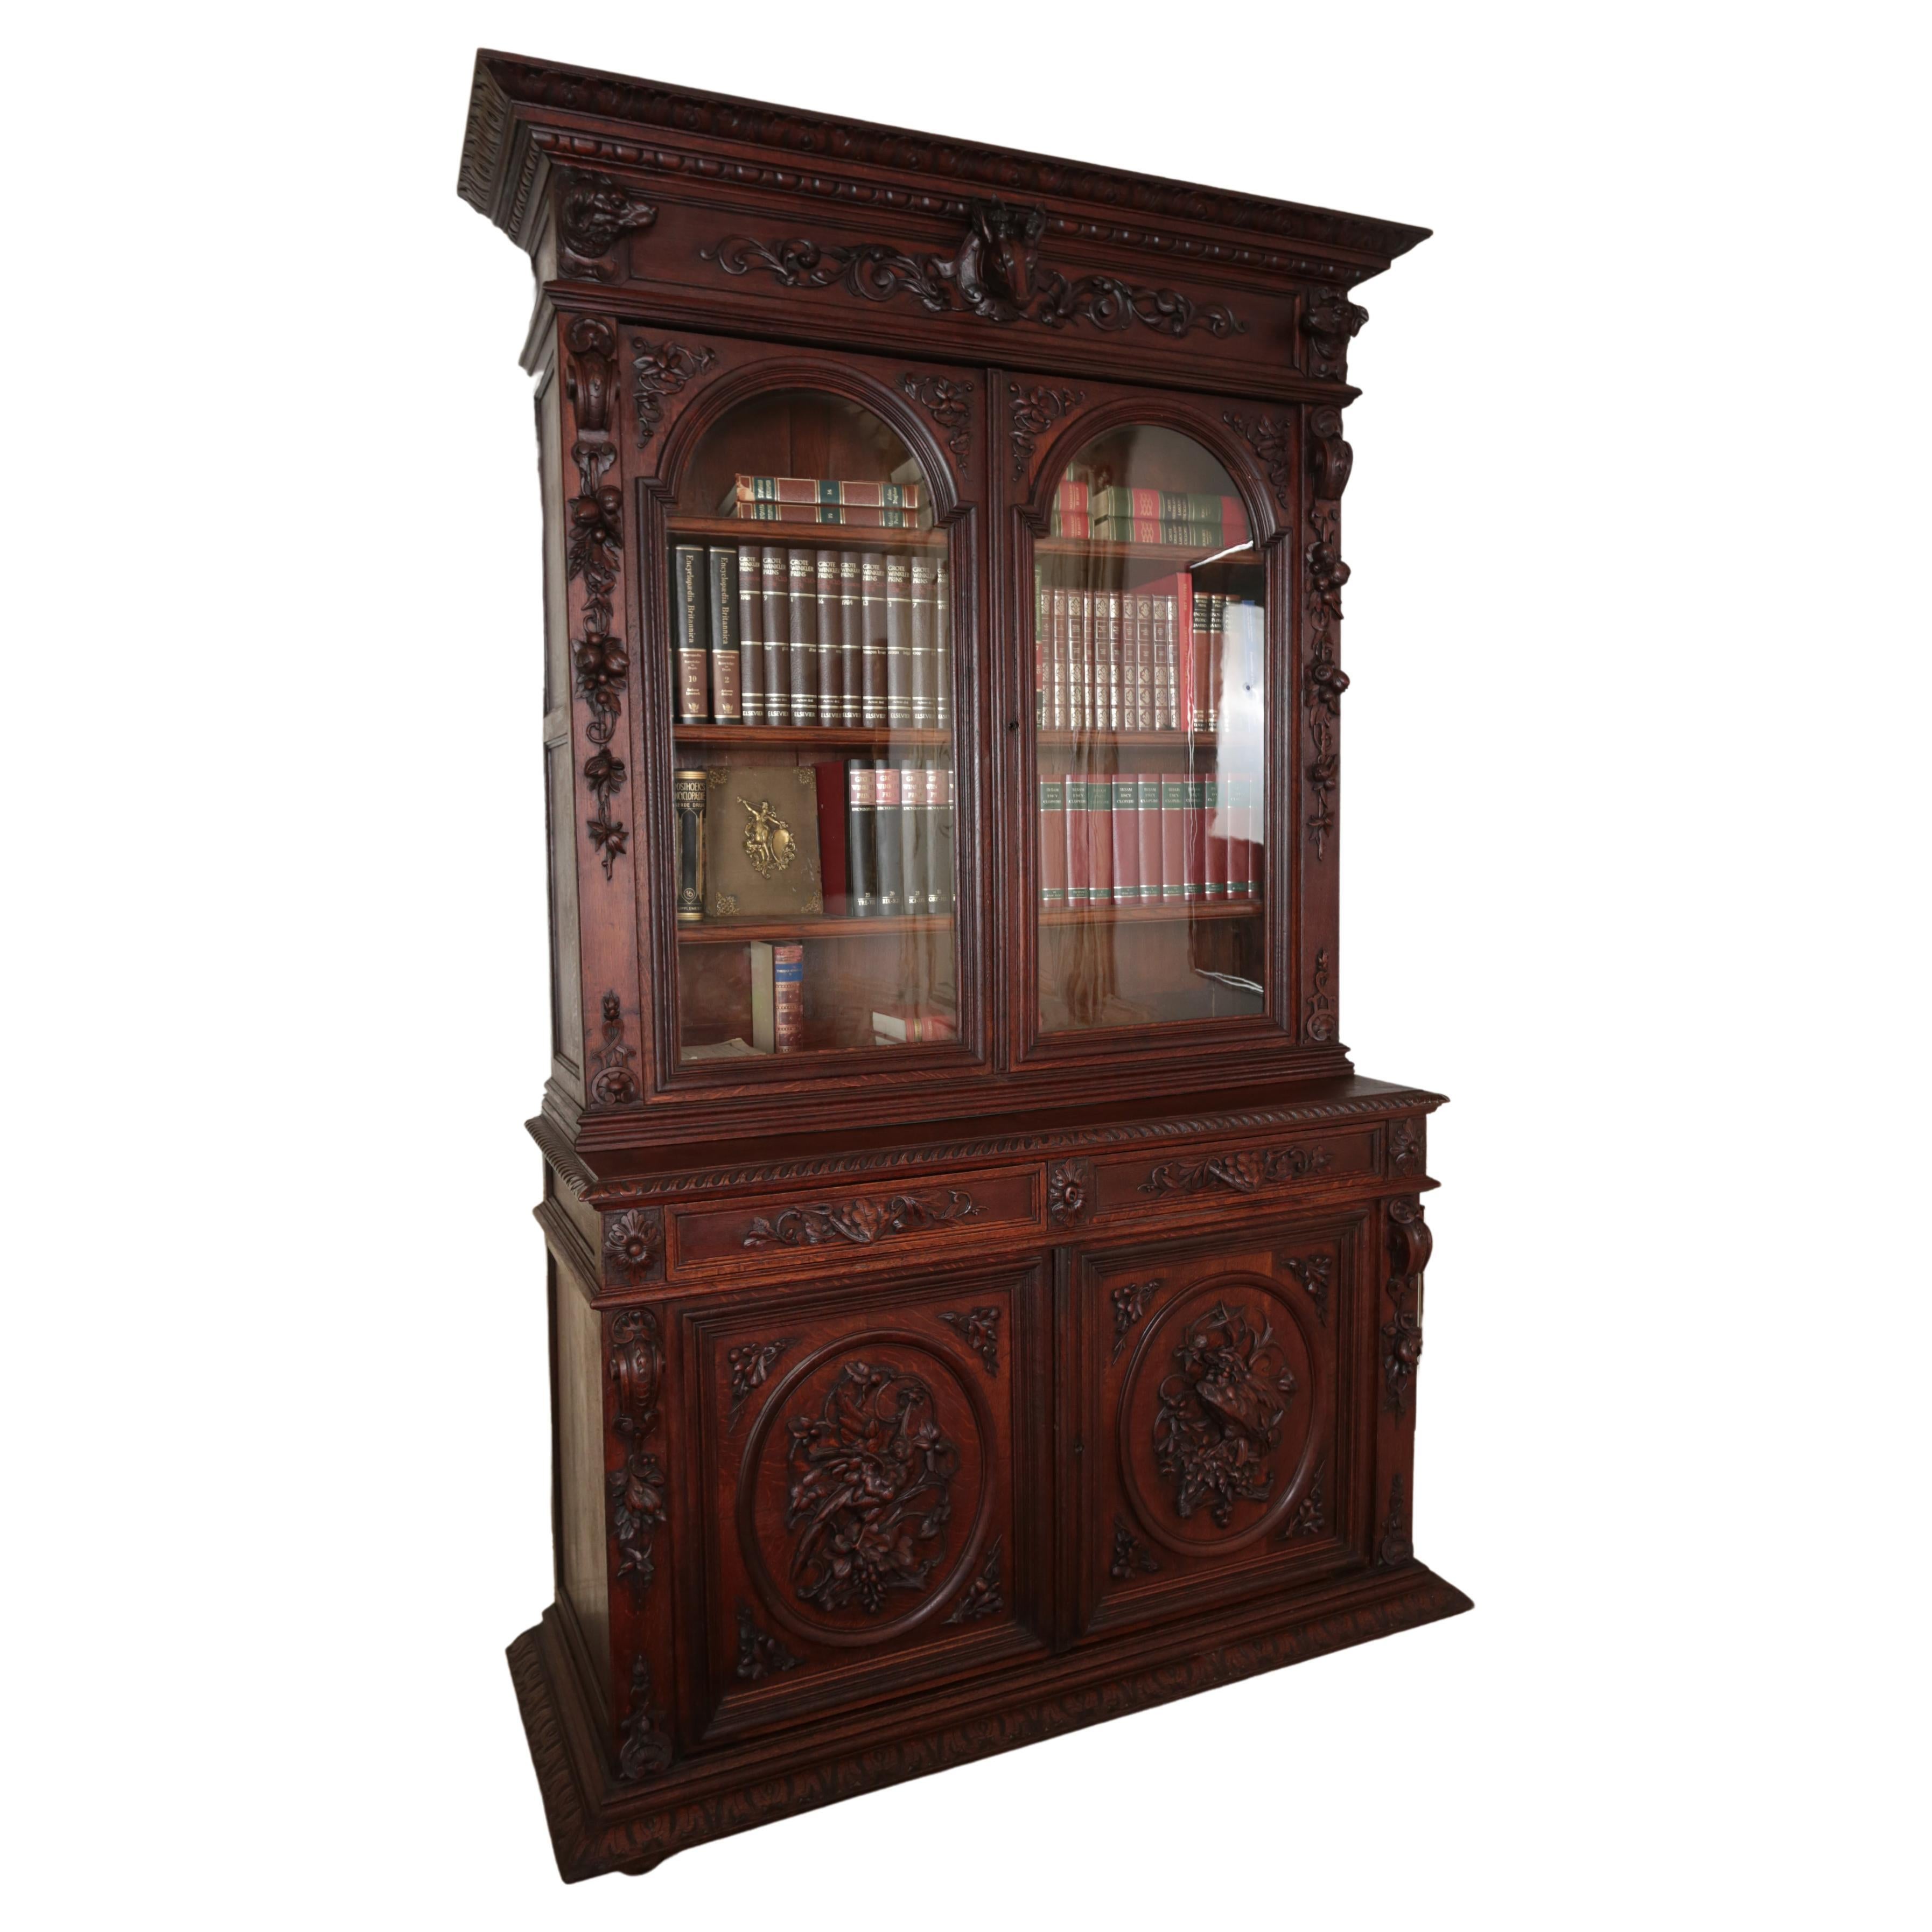 Antique hunting sideboard / bookcase For Sale